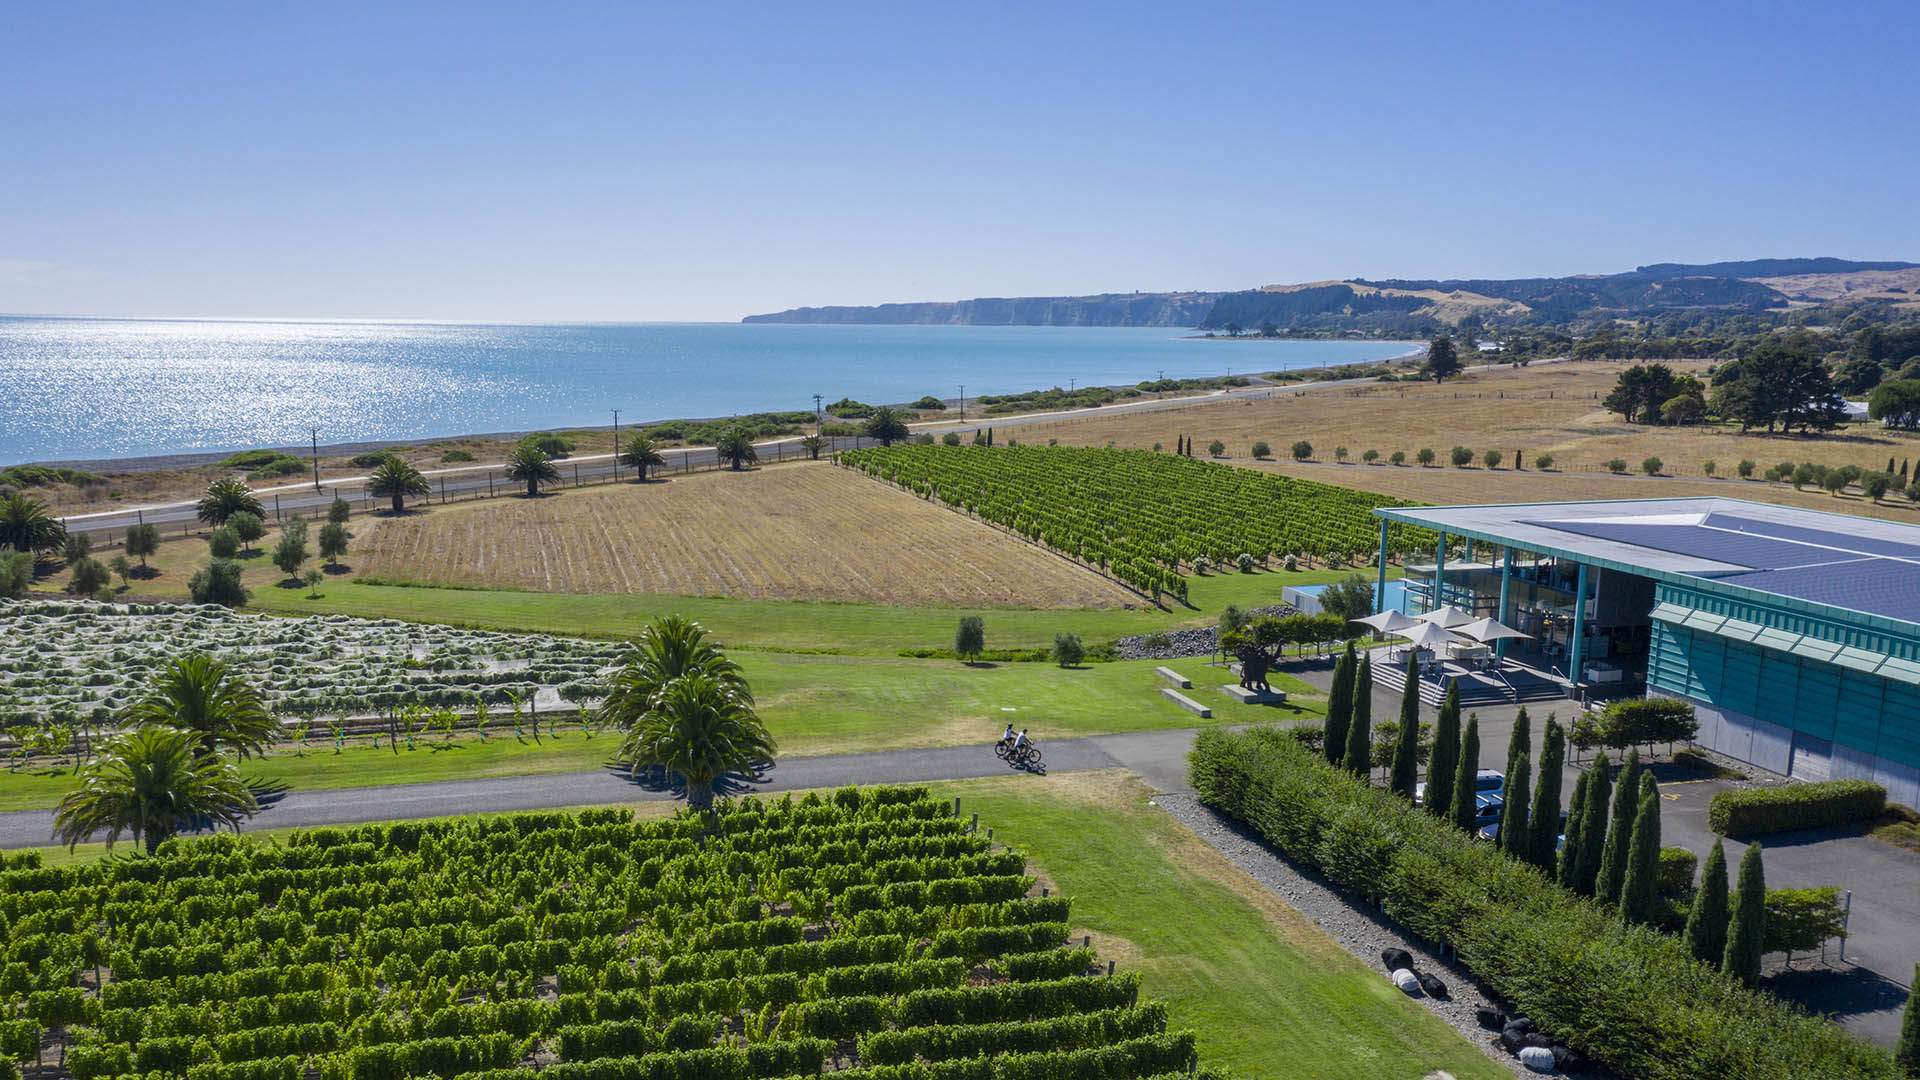 Hawke's Bay Has Just Been Named the 12th Great Wine Capital of the World